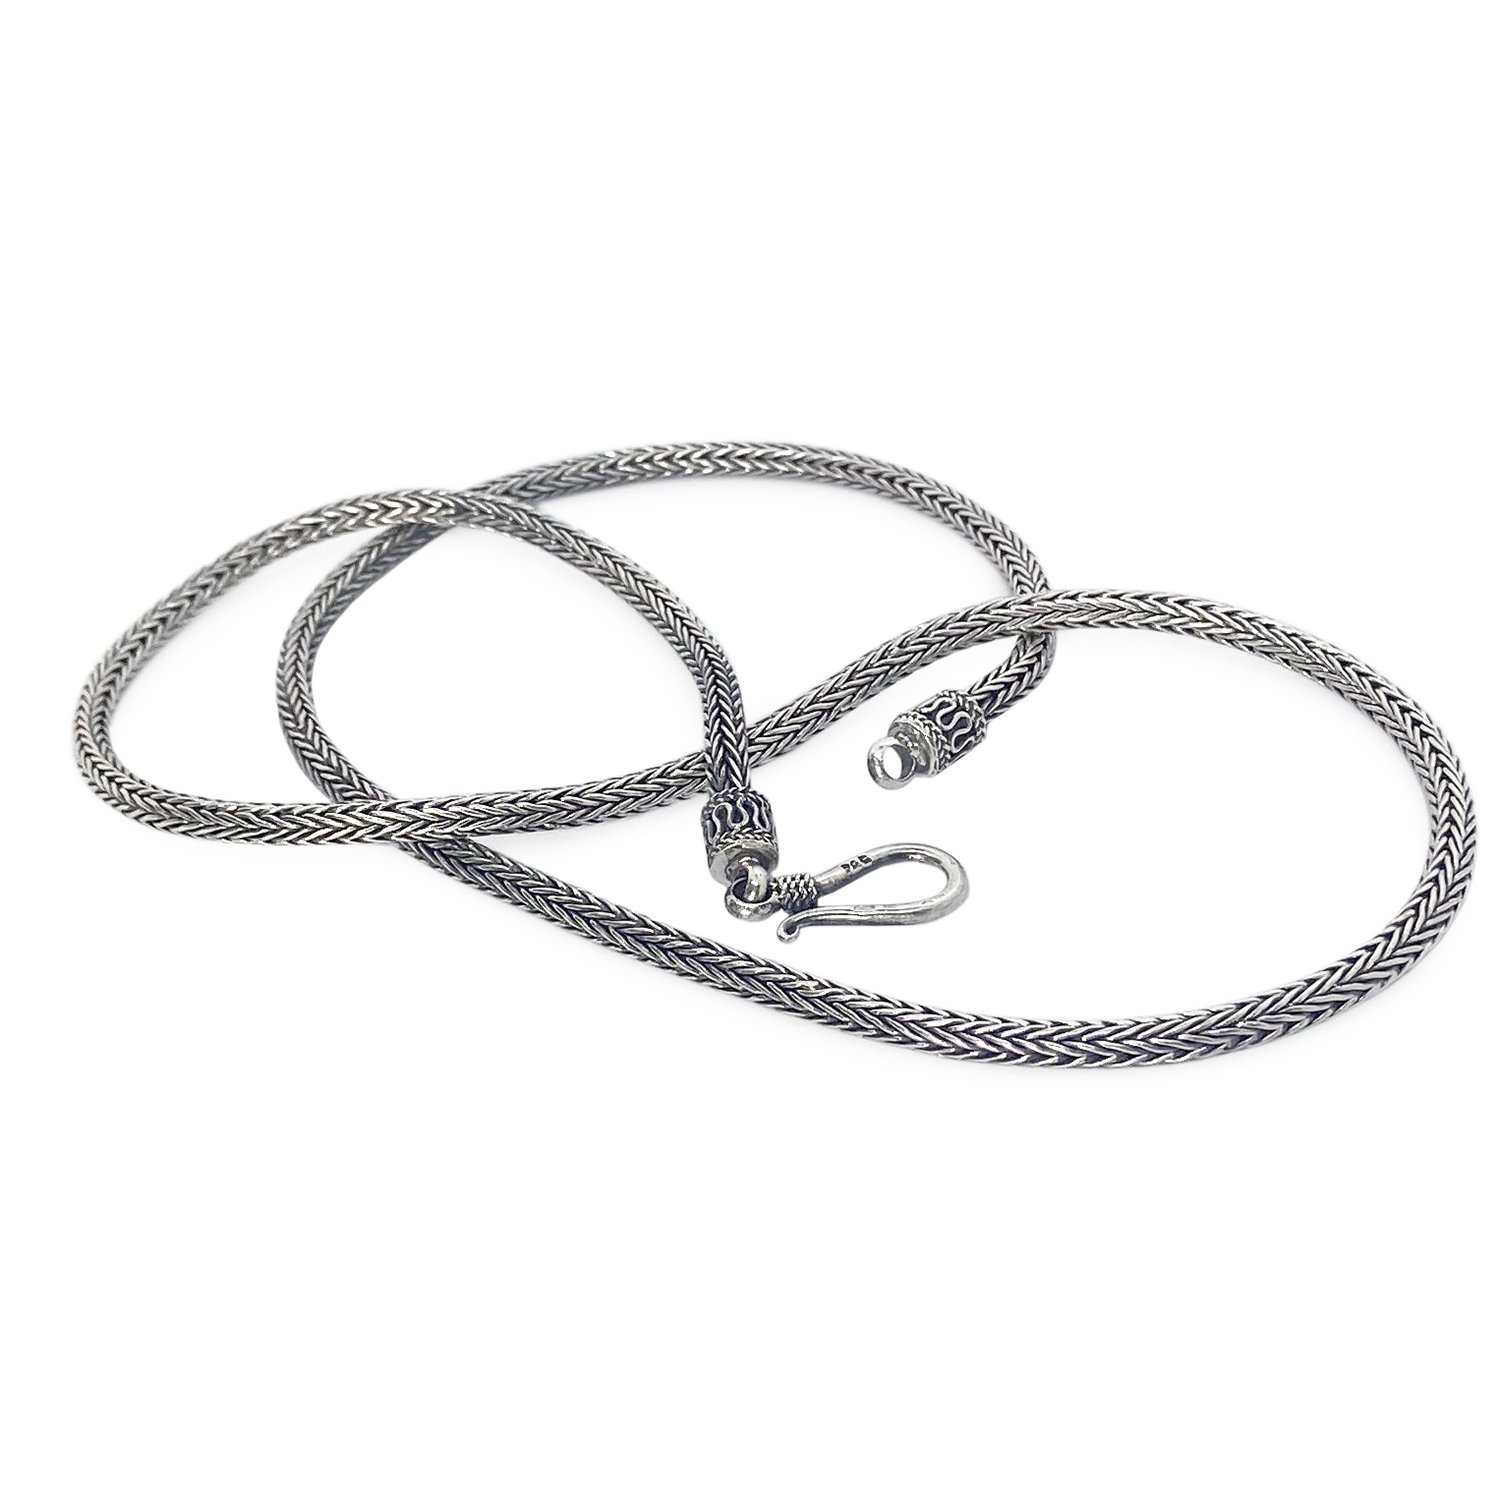 Ladies Silver Necklace - 3mm Snake Link Chain